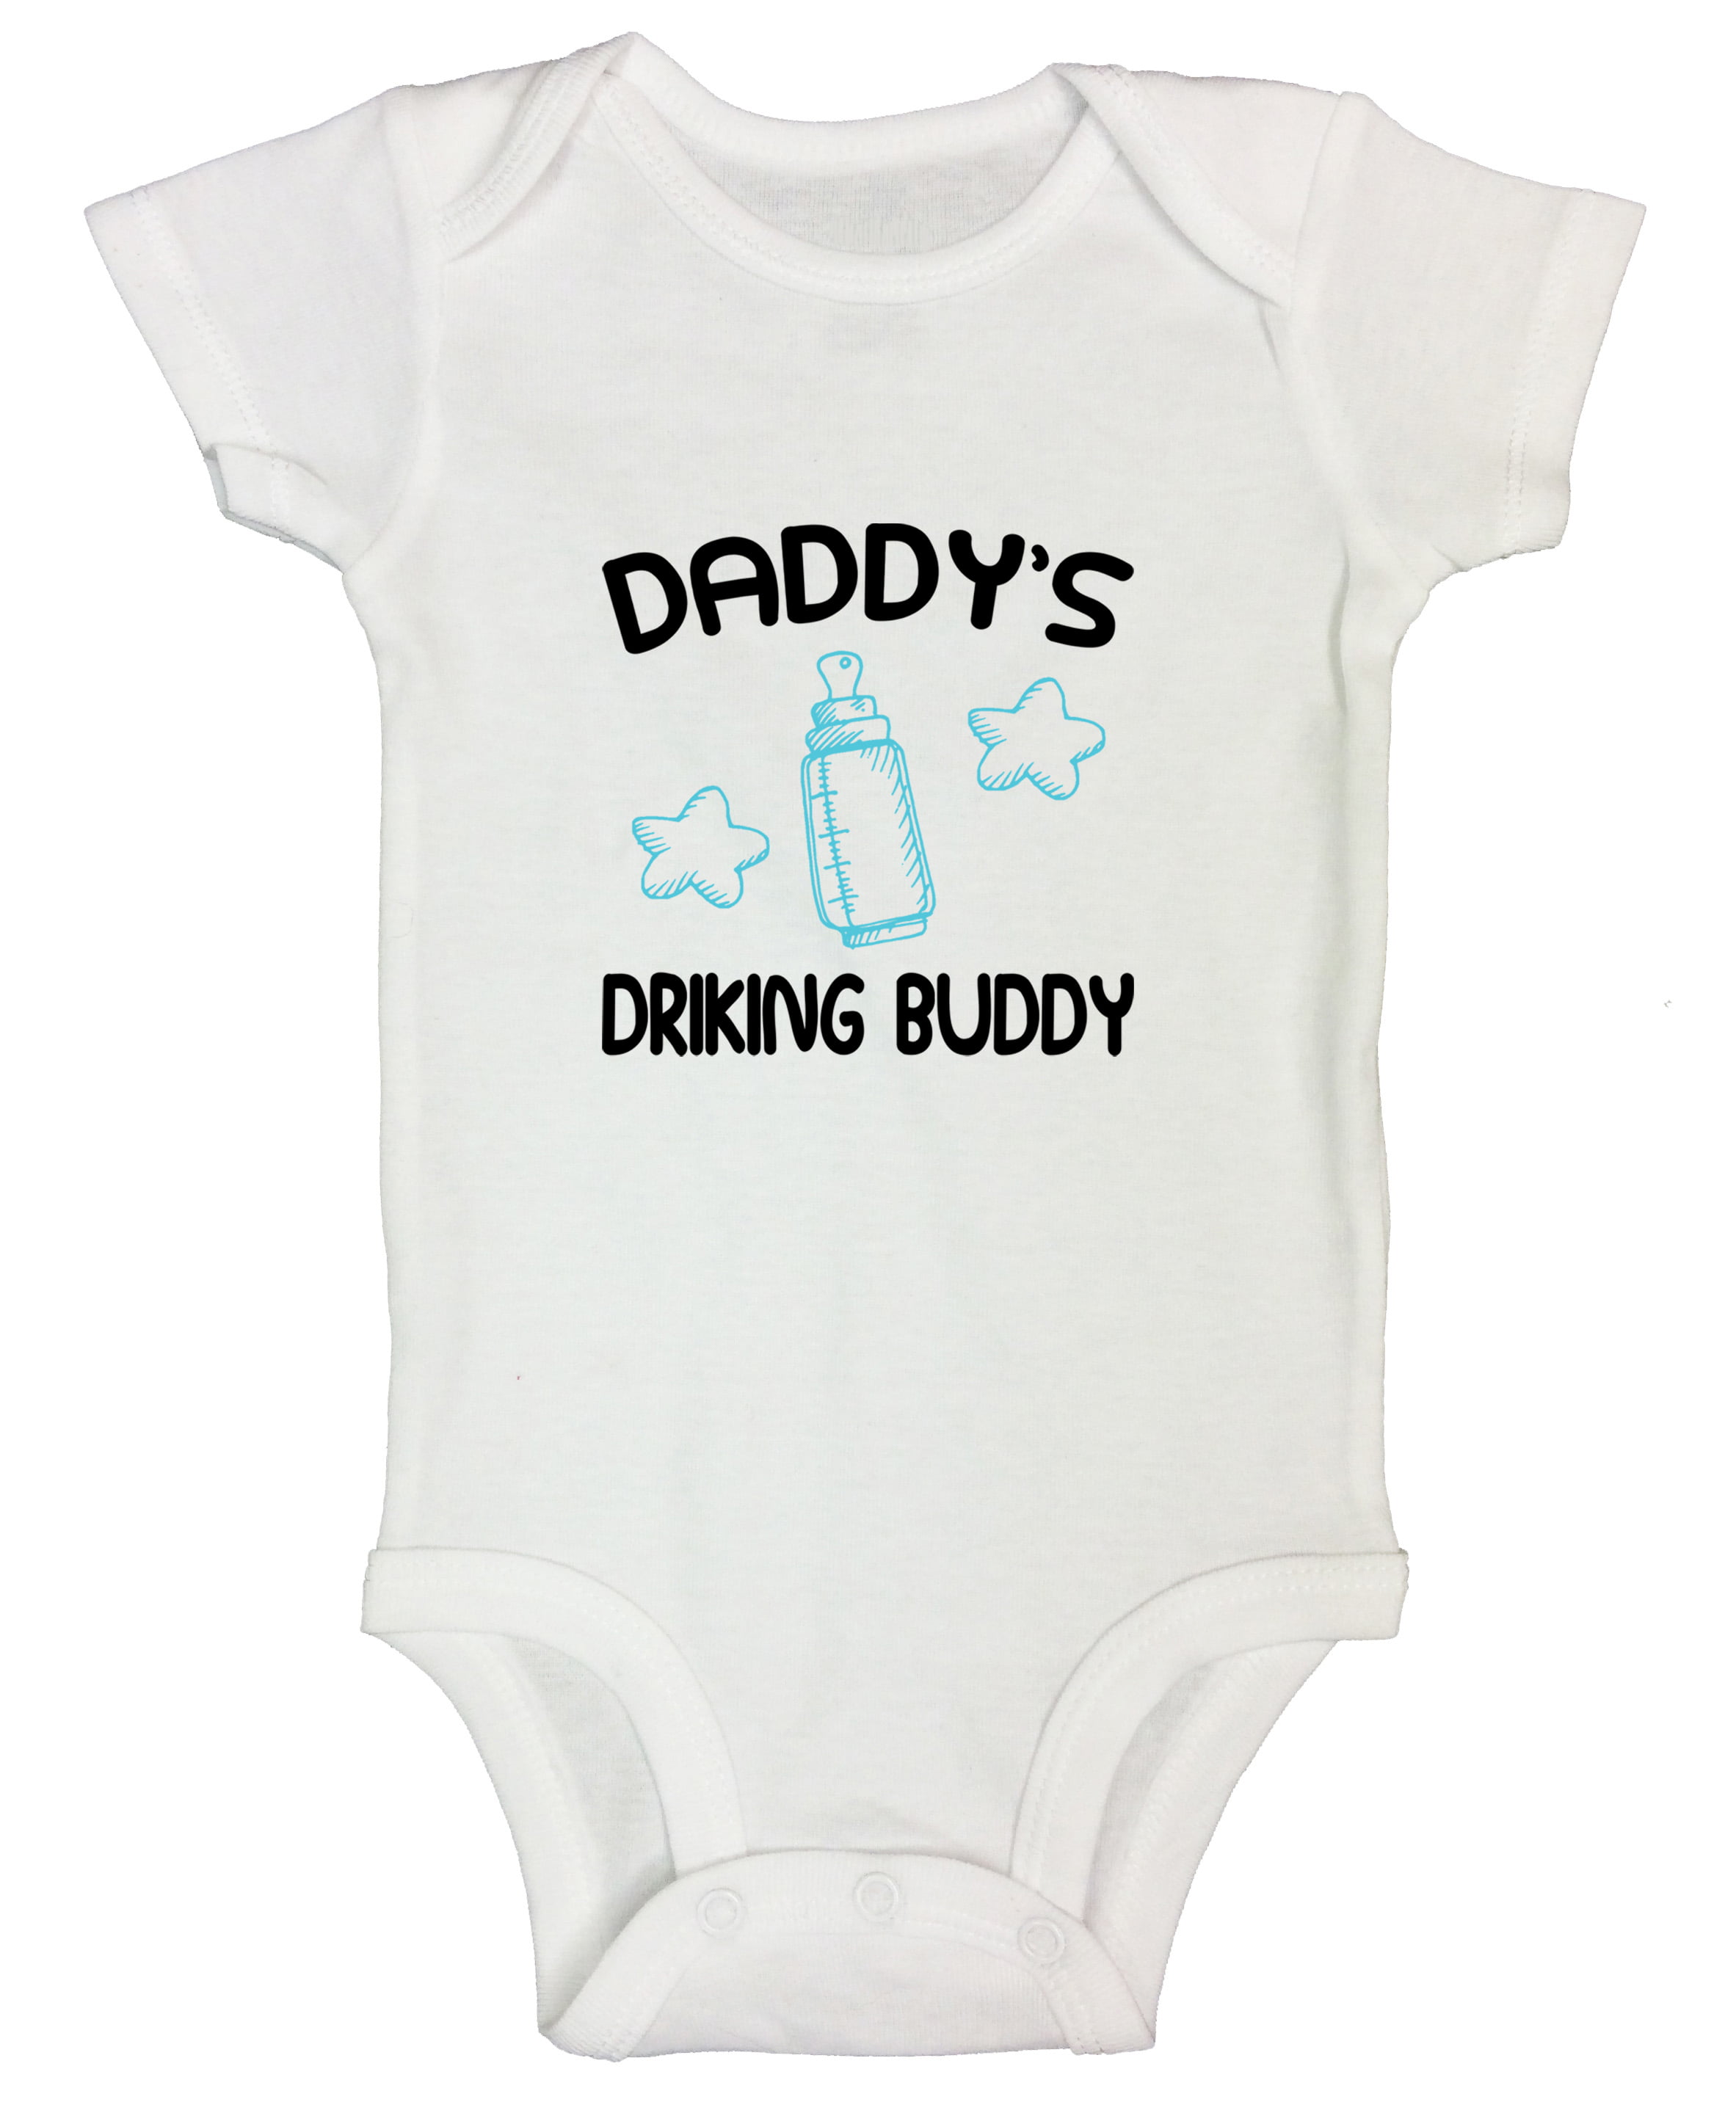 Daddy/'s Drinking Buddy Baby Onesie\u00ae Funny Baby Onesies for Dad Beer Onesie Funny Milk Shirts Unisex Baby Clothes Baby Shower Gifts